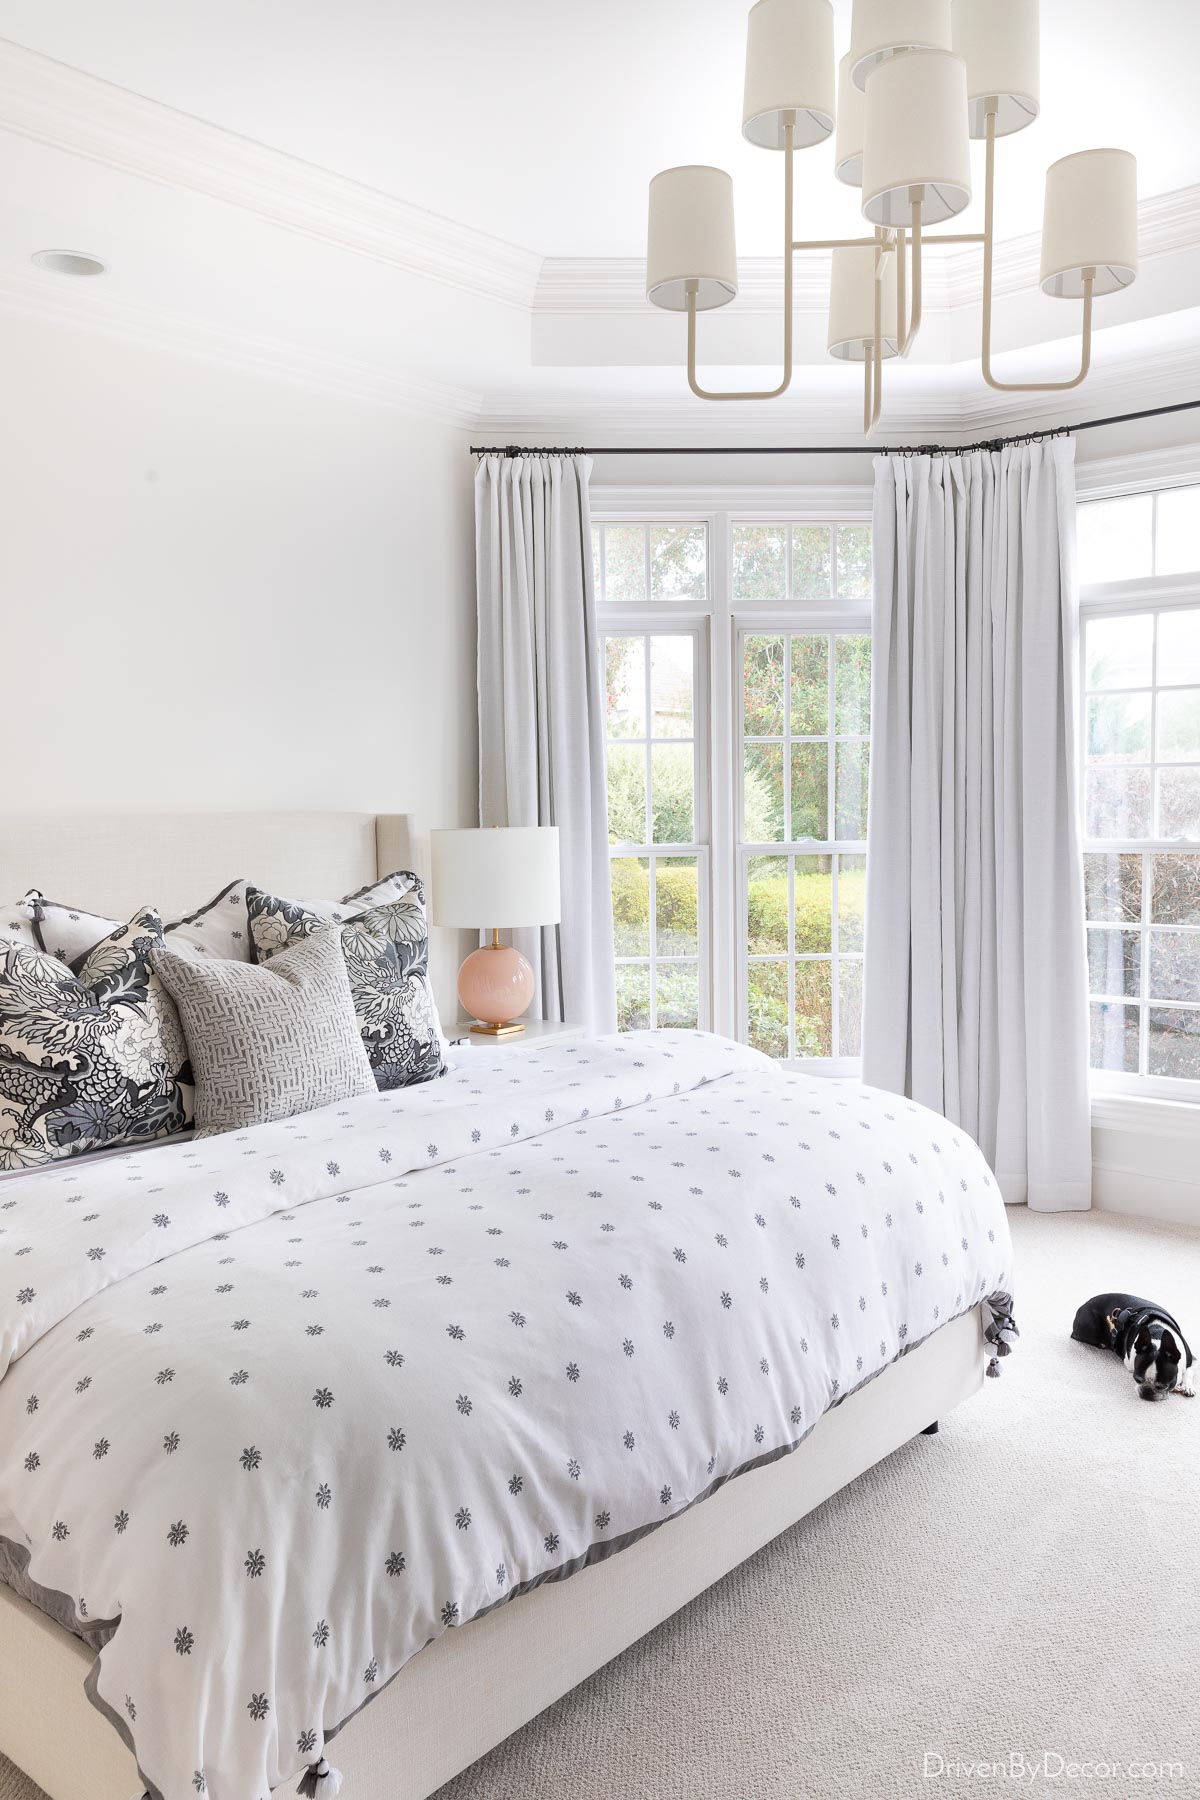 White Emery linen curtains on windows in bedroom